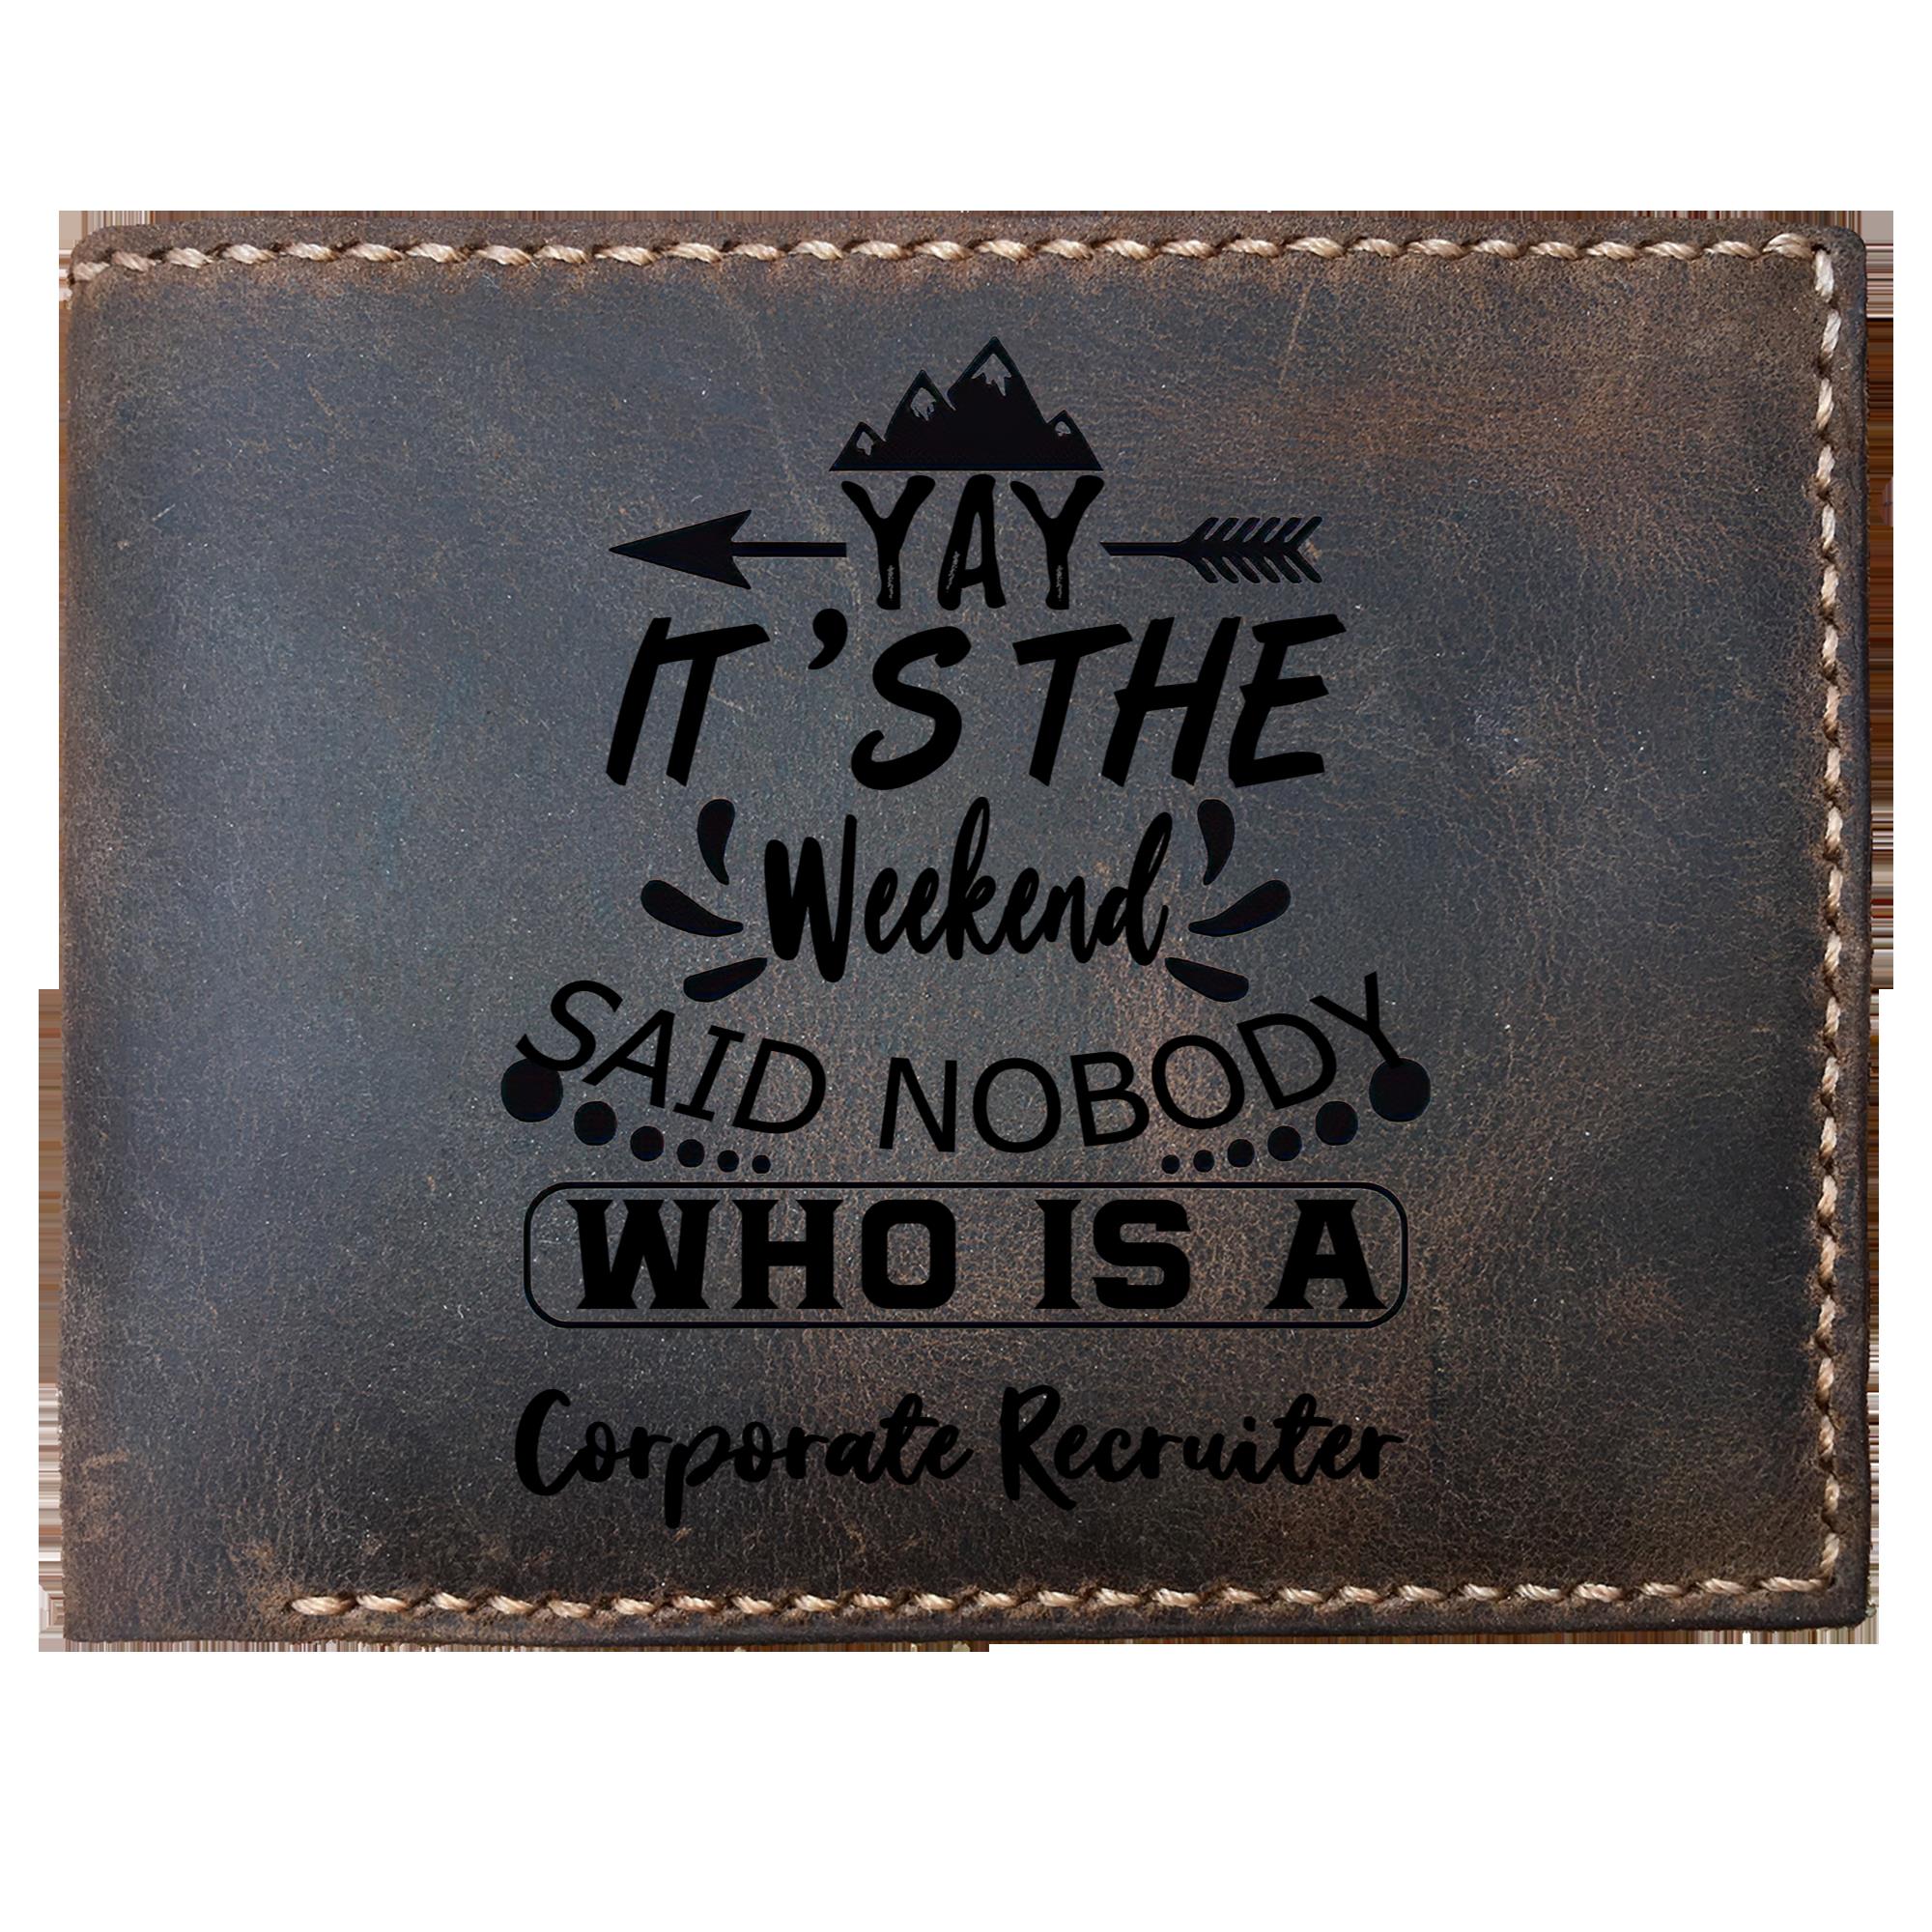 Skitongifts Funny Custom Laser Engraved Bifold Leather Wallet For Men, It's The Weekend Said Nobody Who Is A Corporate Recruiter, Father's Day Gifts